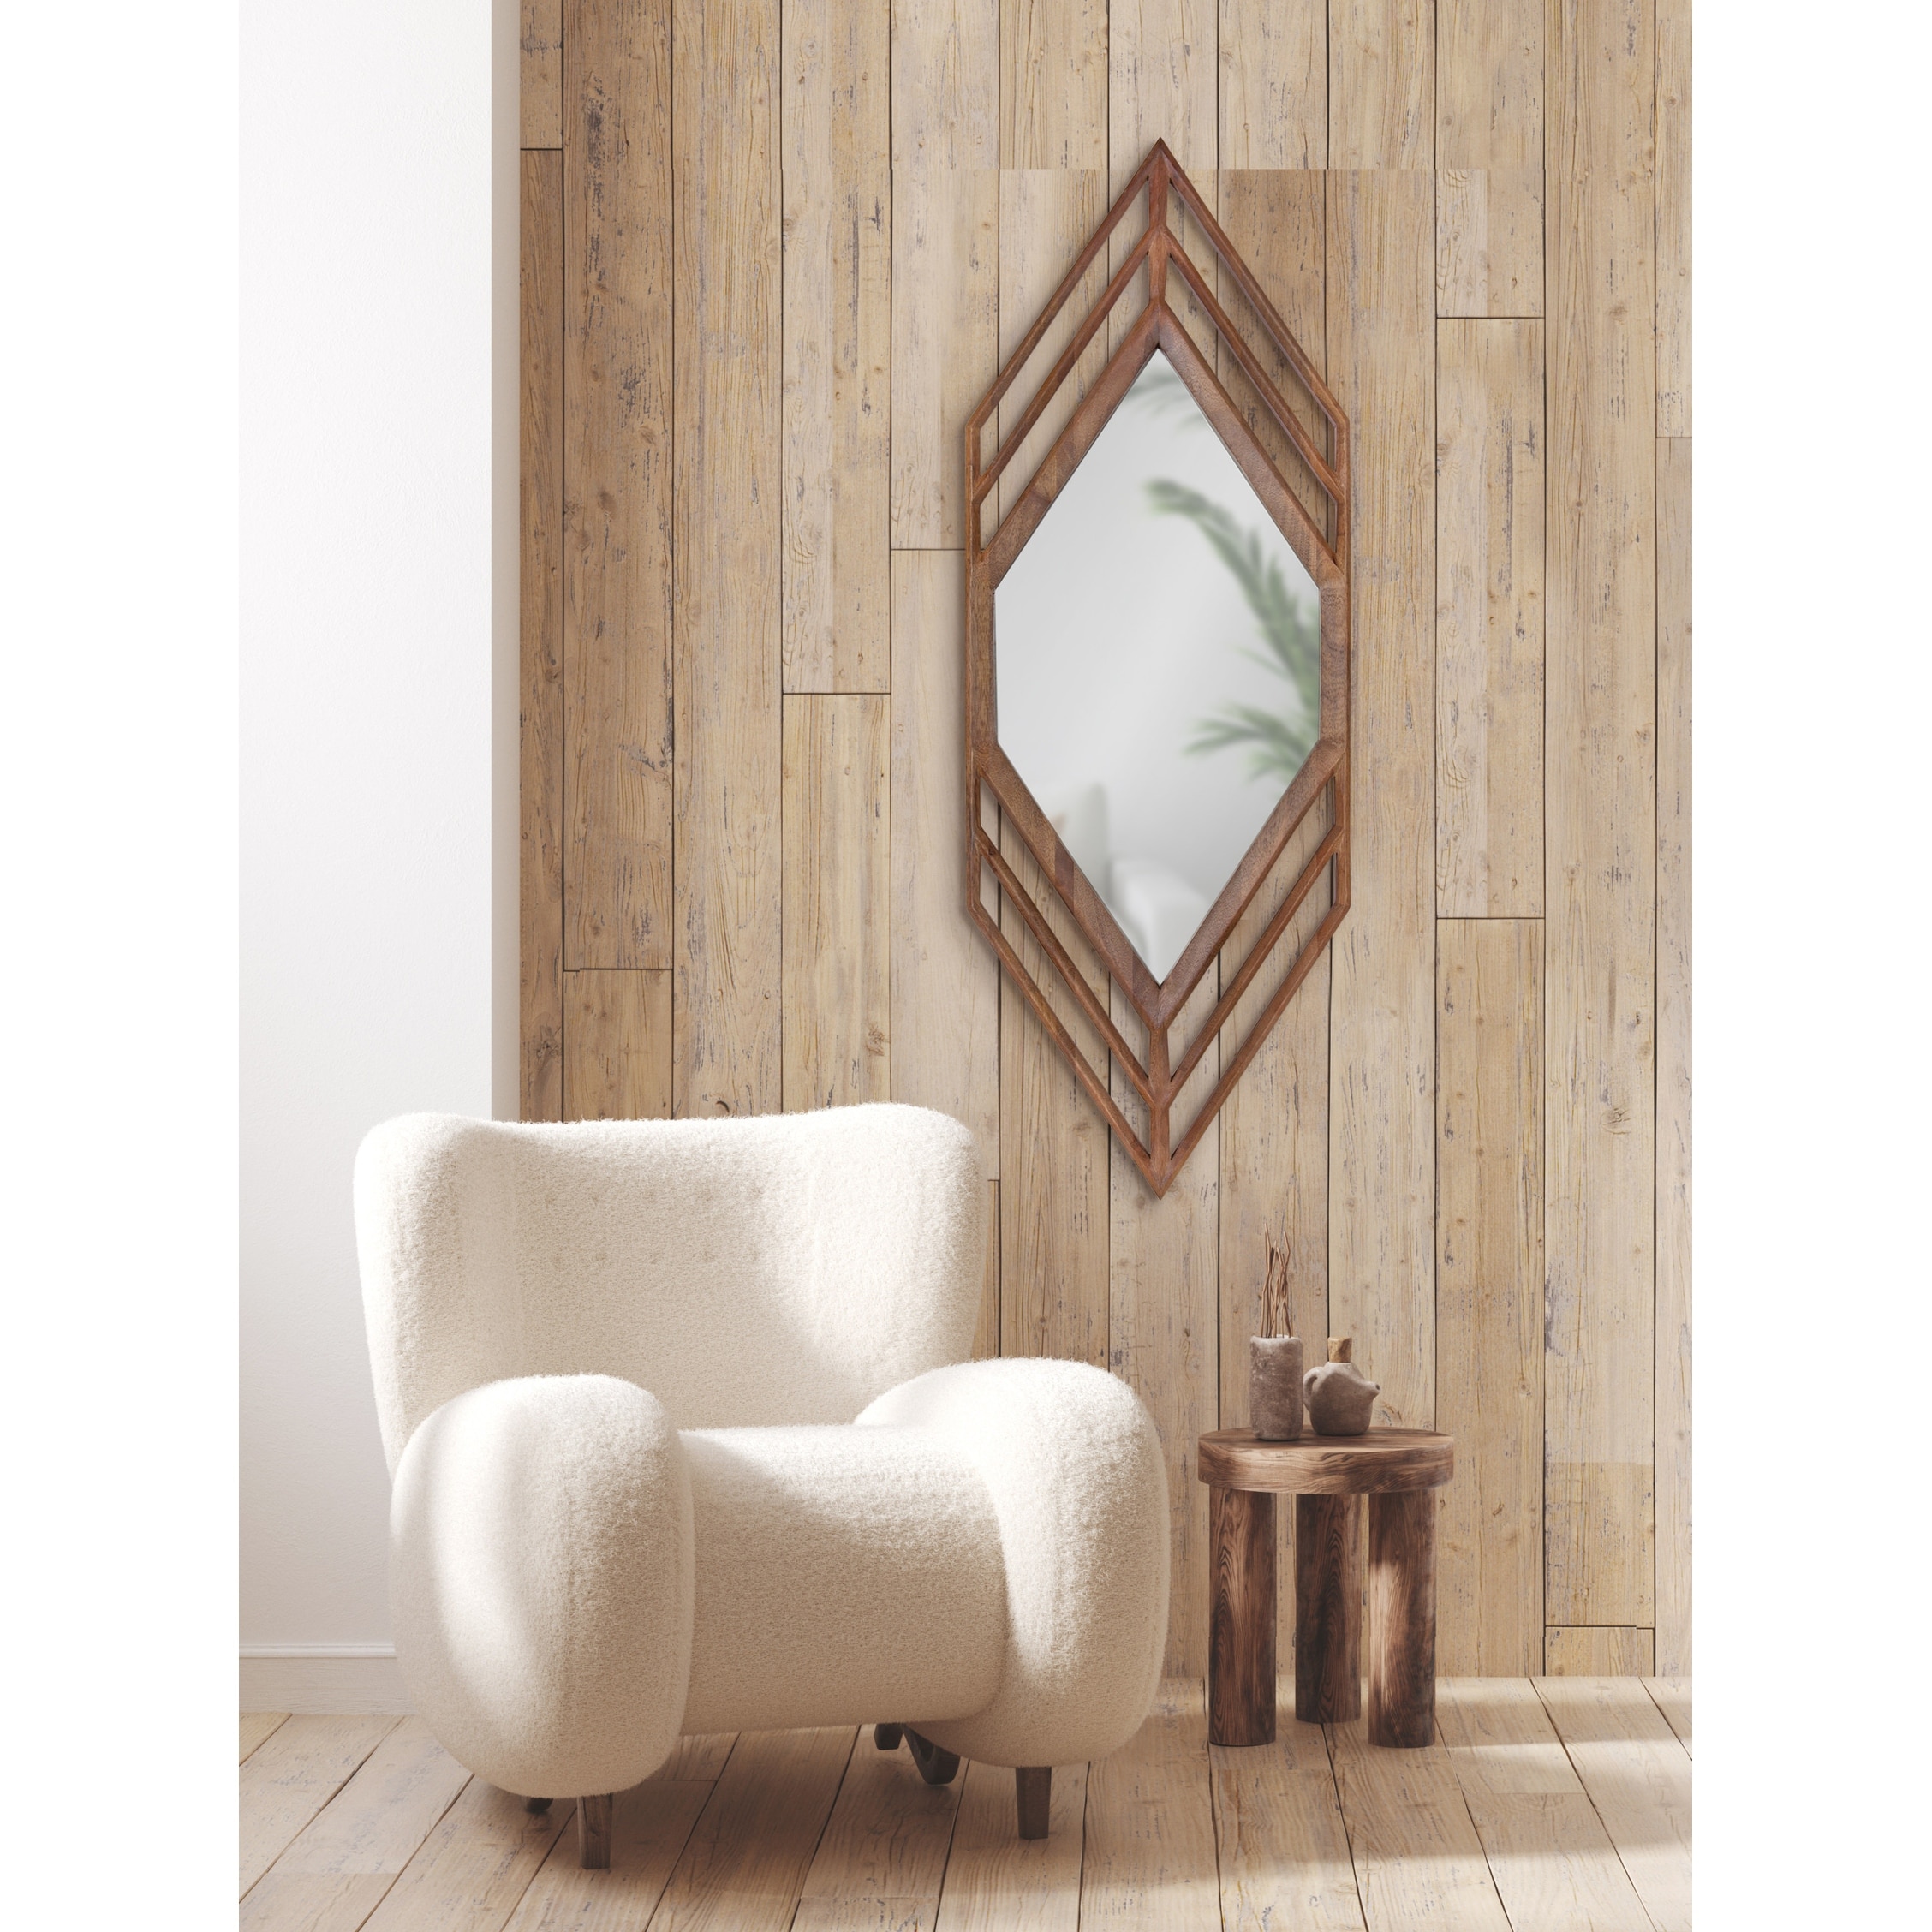 Kate and Laurel Norlund 28-in W x 28-in H Round Natural Framed Wall Mirror